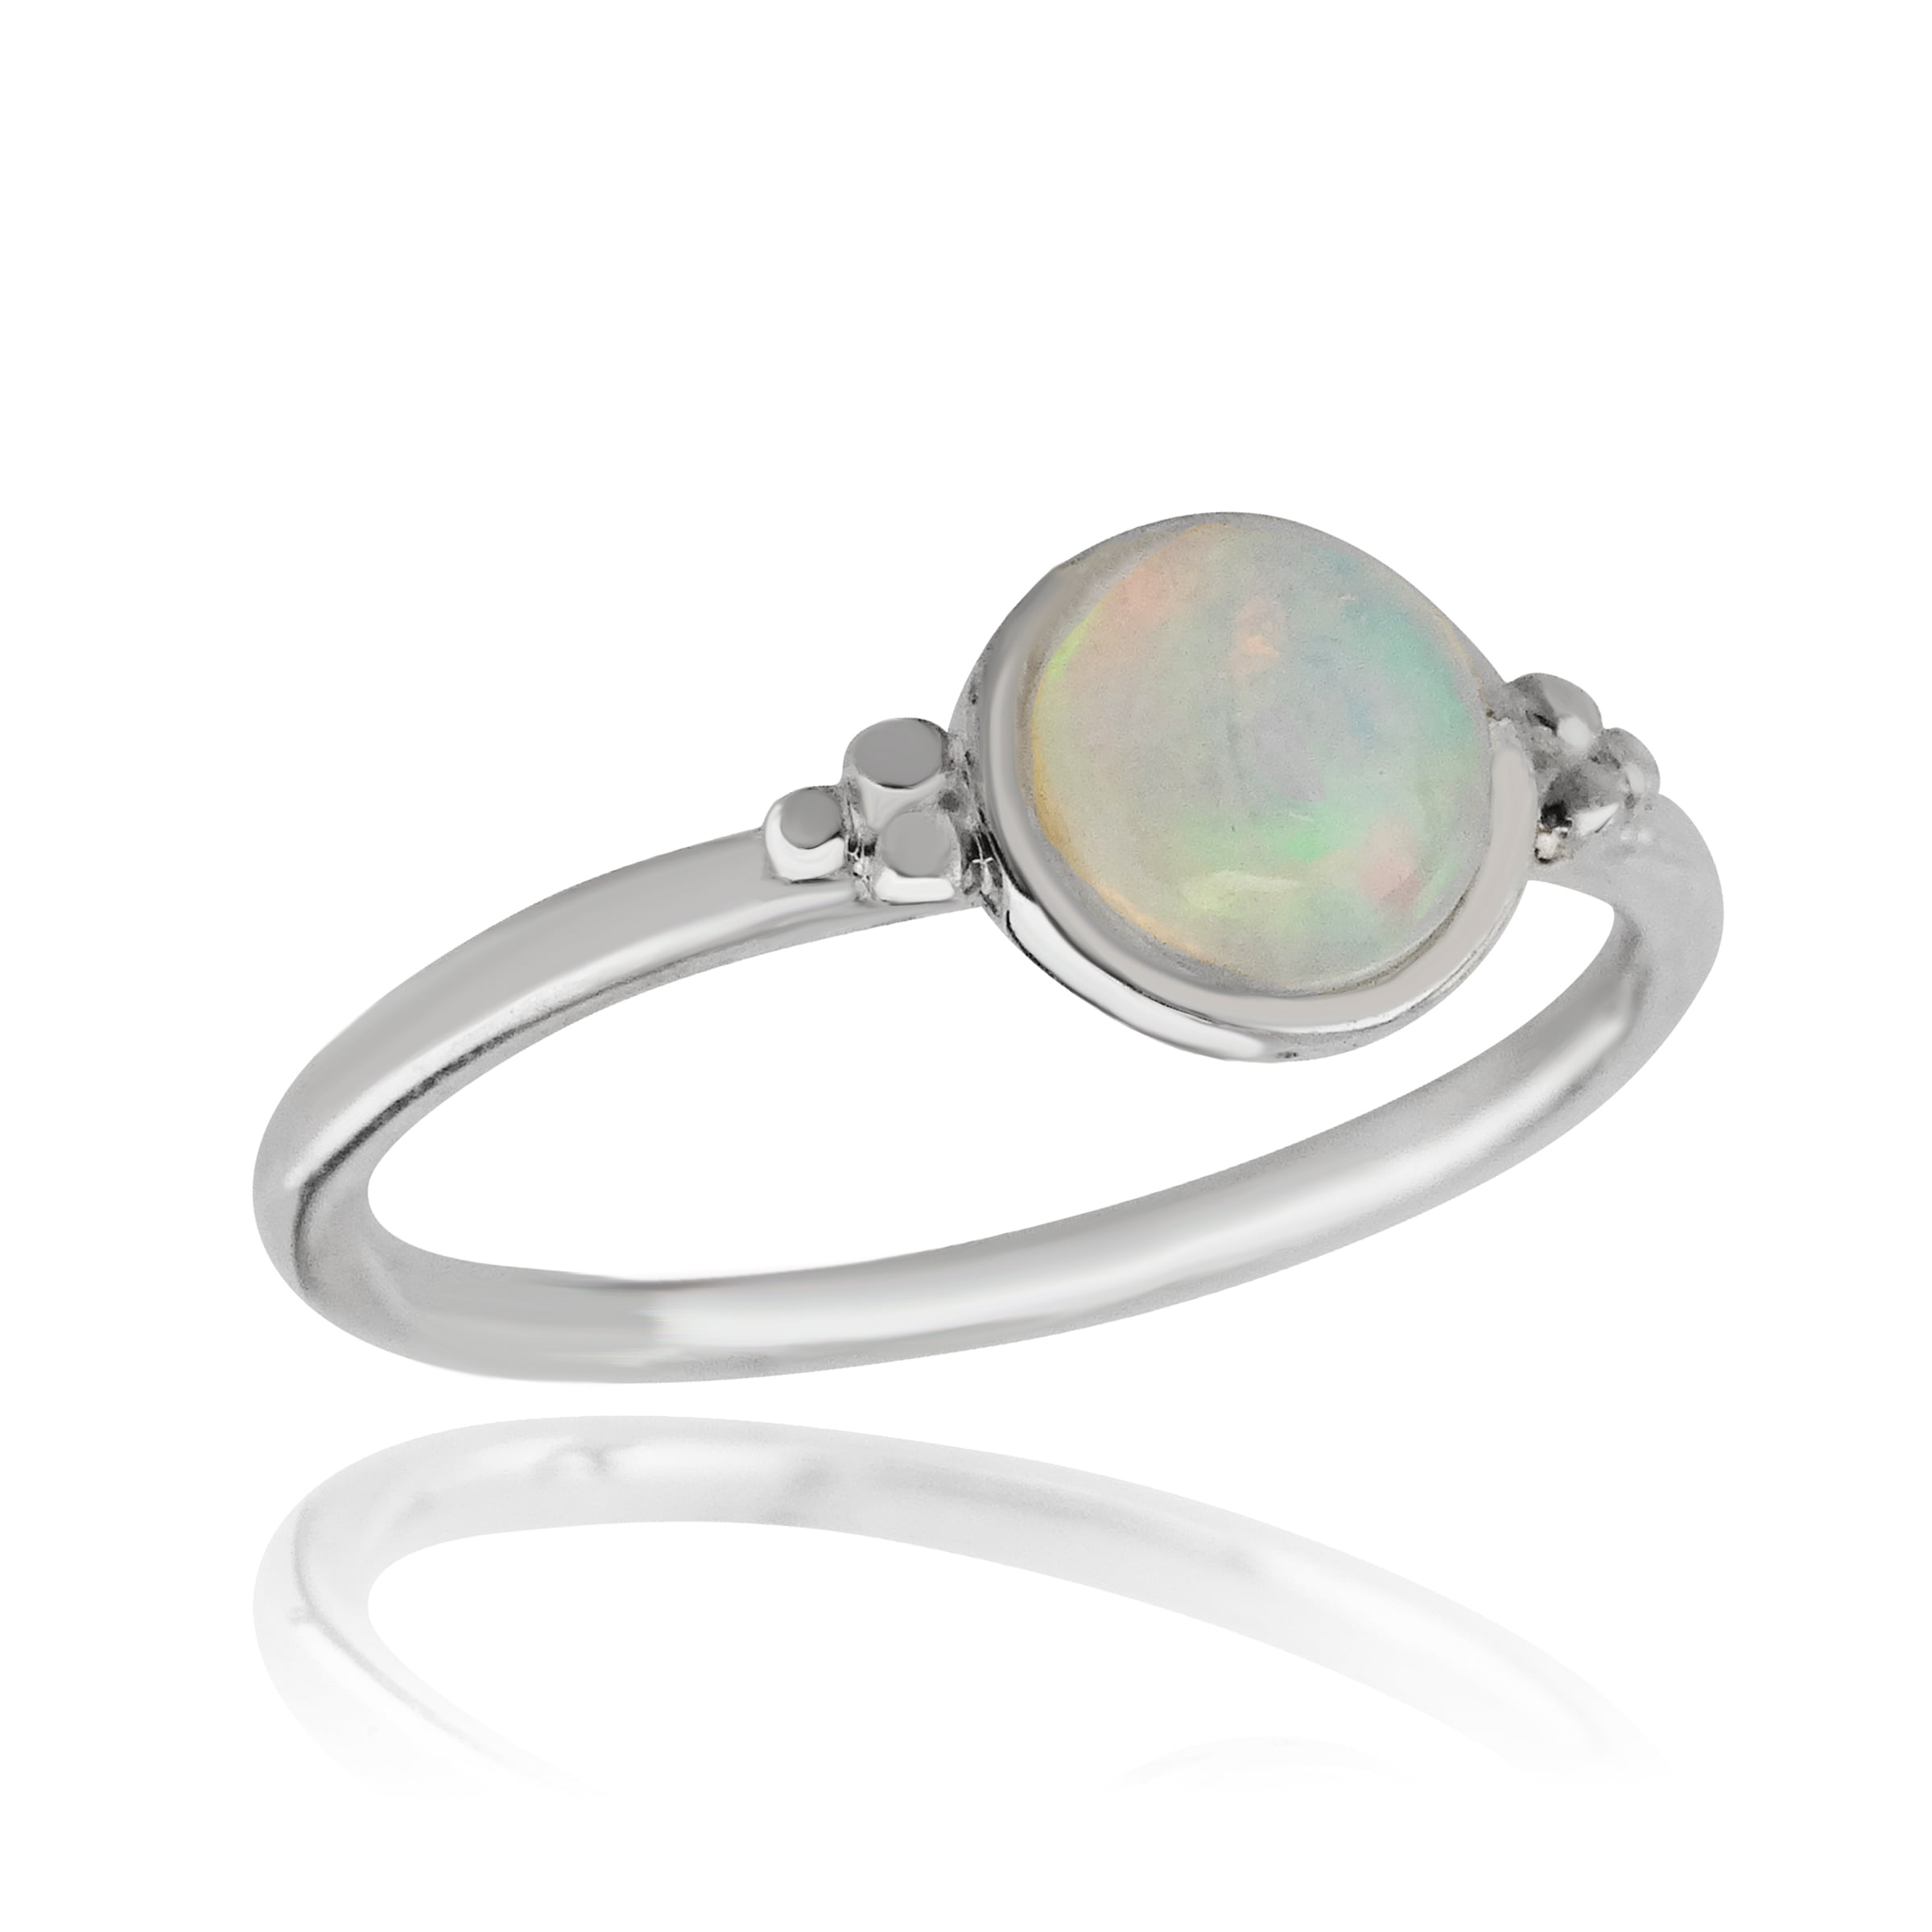 FB Jewels 1.95 Carat Genuine Ethiopian Opal and White Cubic Zirconia 925 Sterling Silver Birthstone Ring